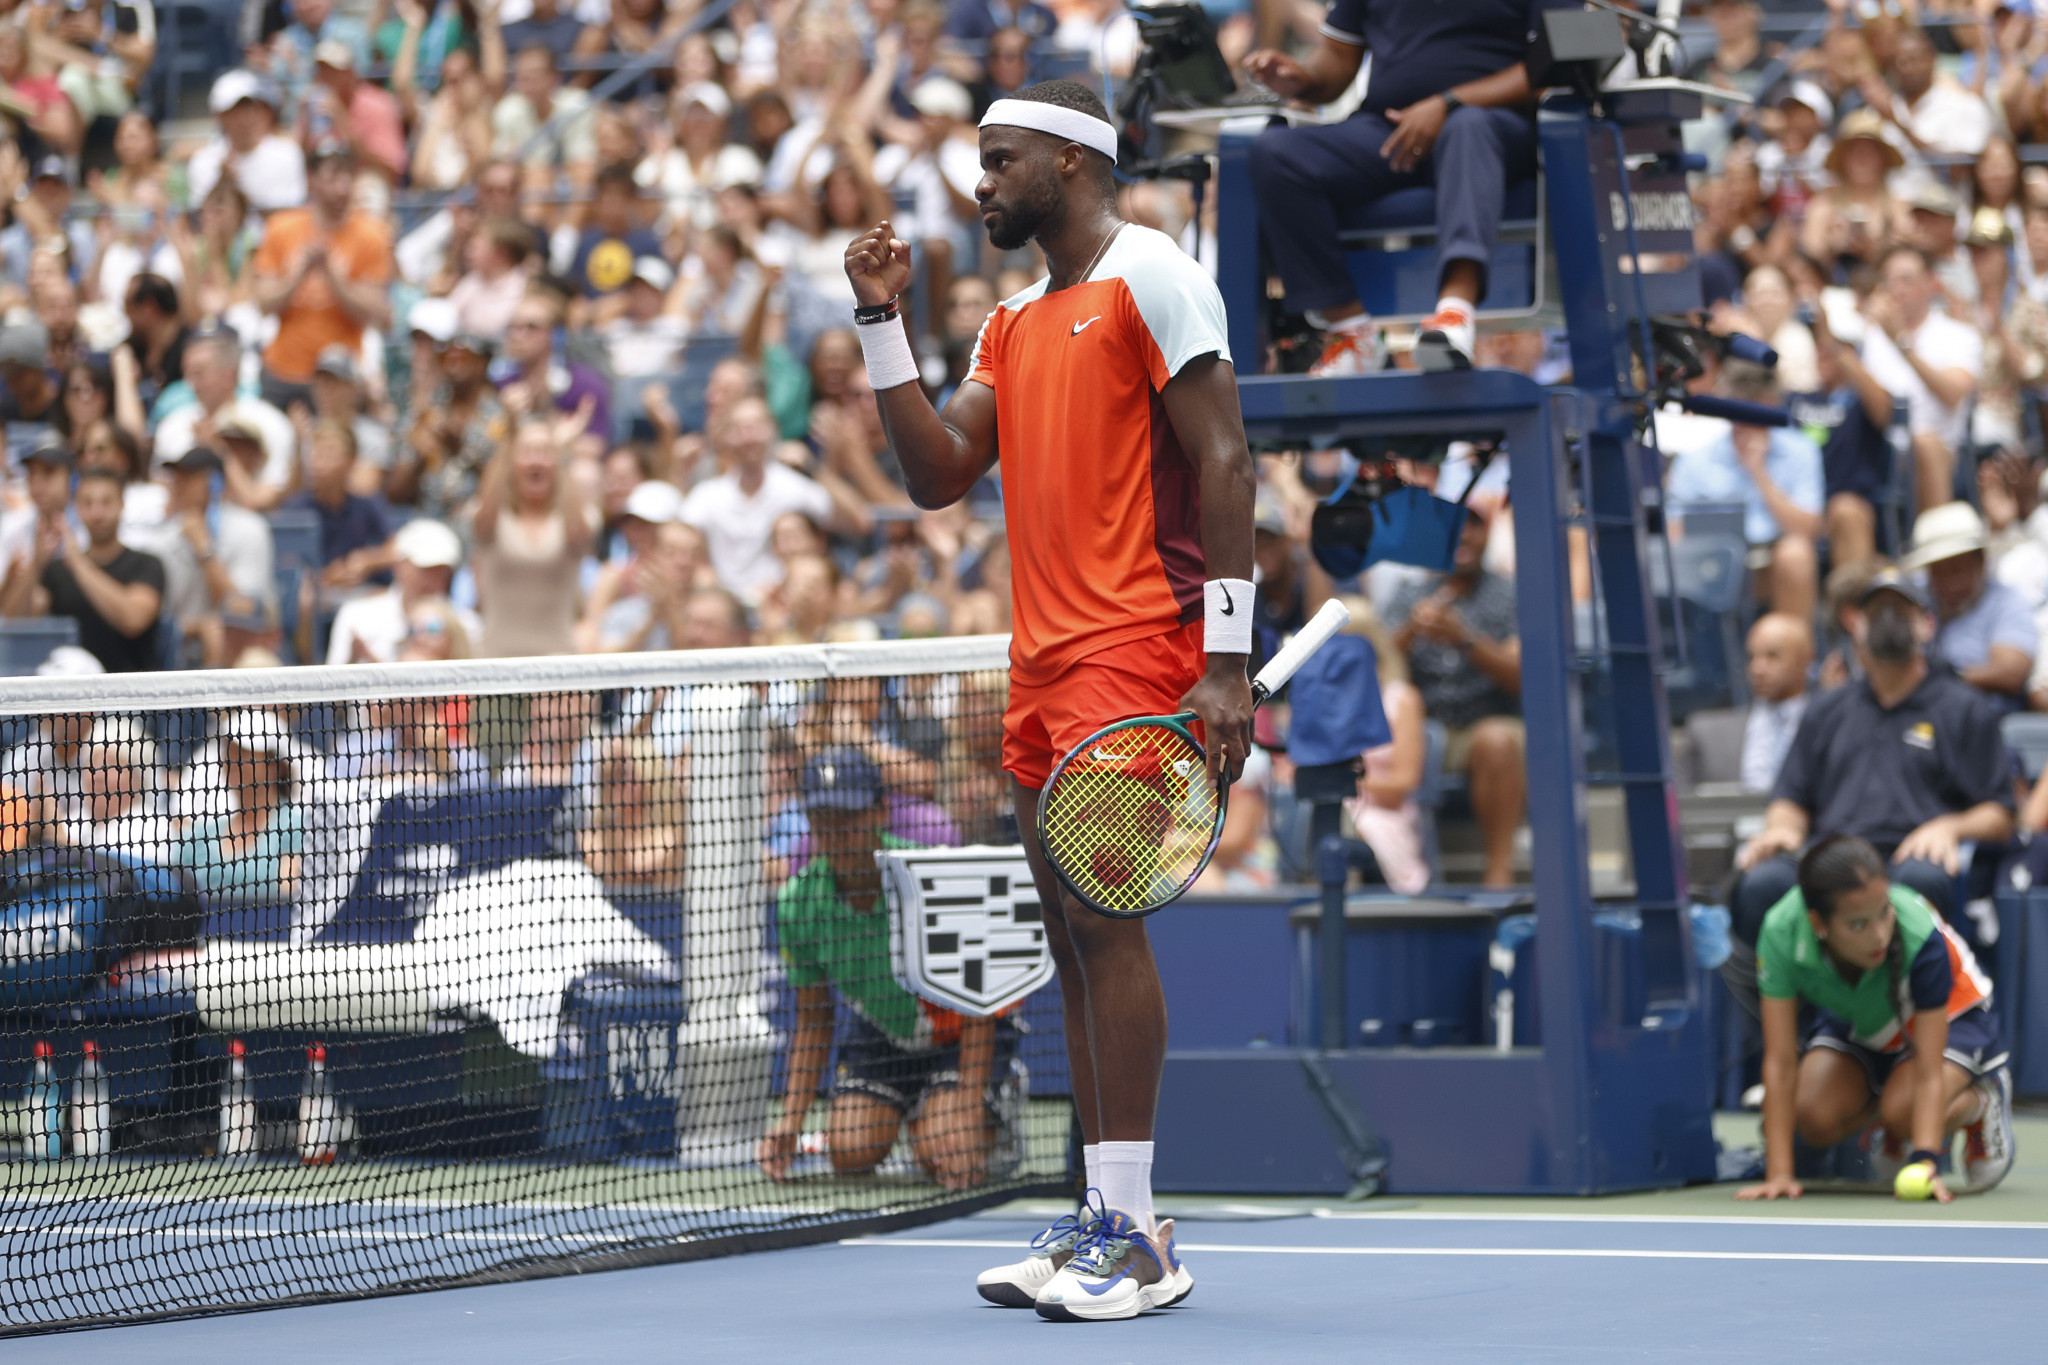 Labour Day celebrations for home crowd at US Open as Tiafoe stuns Nadal